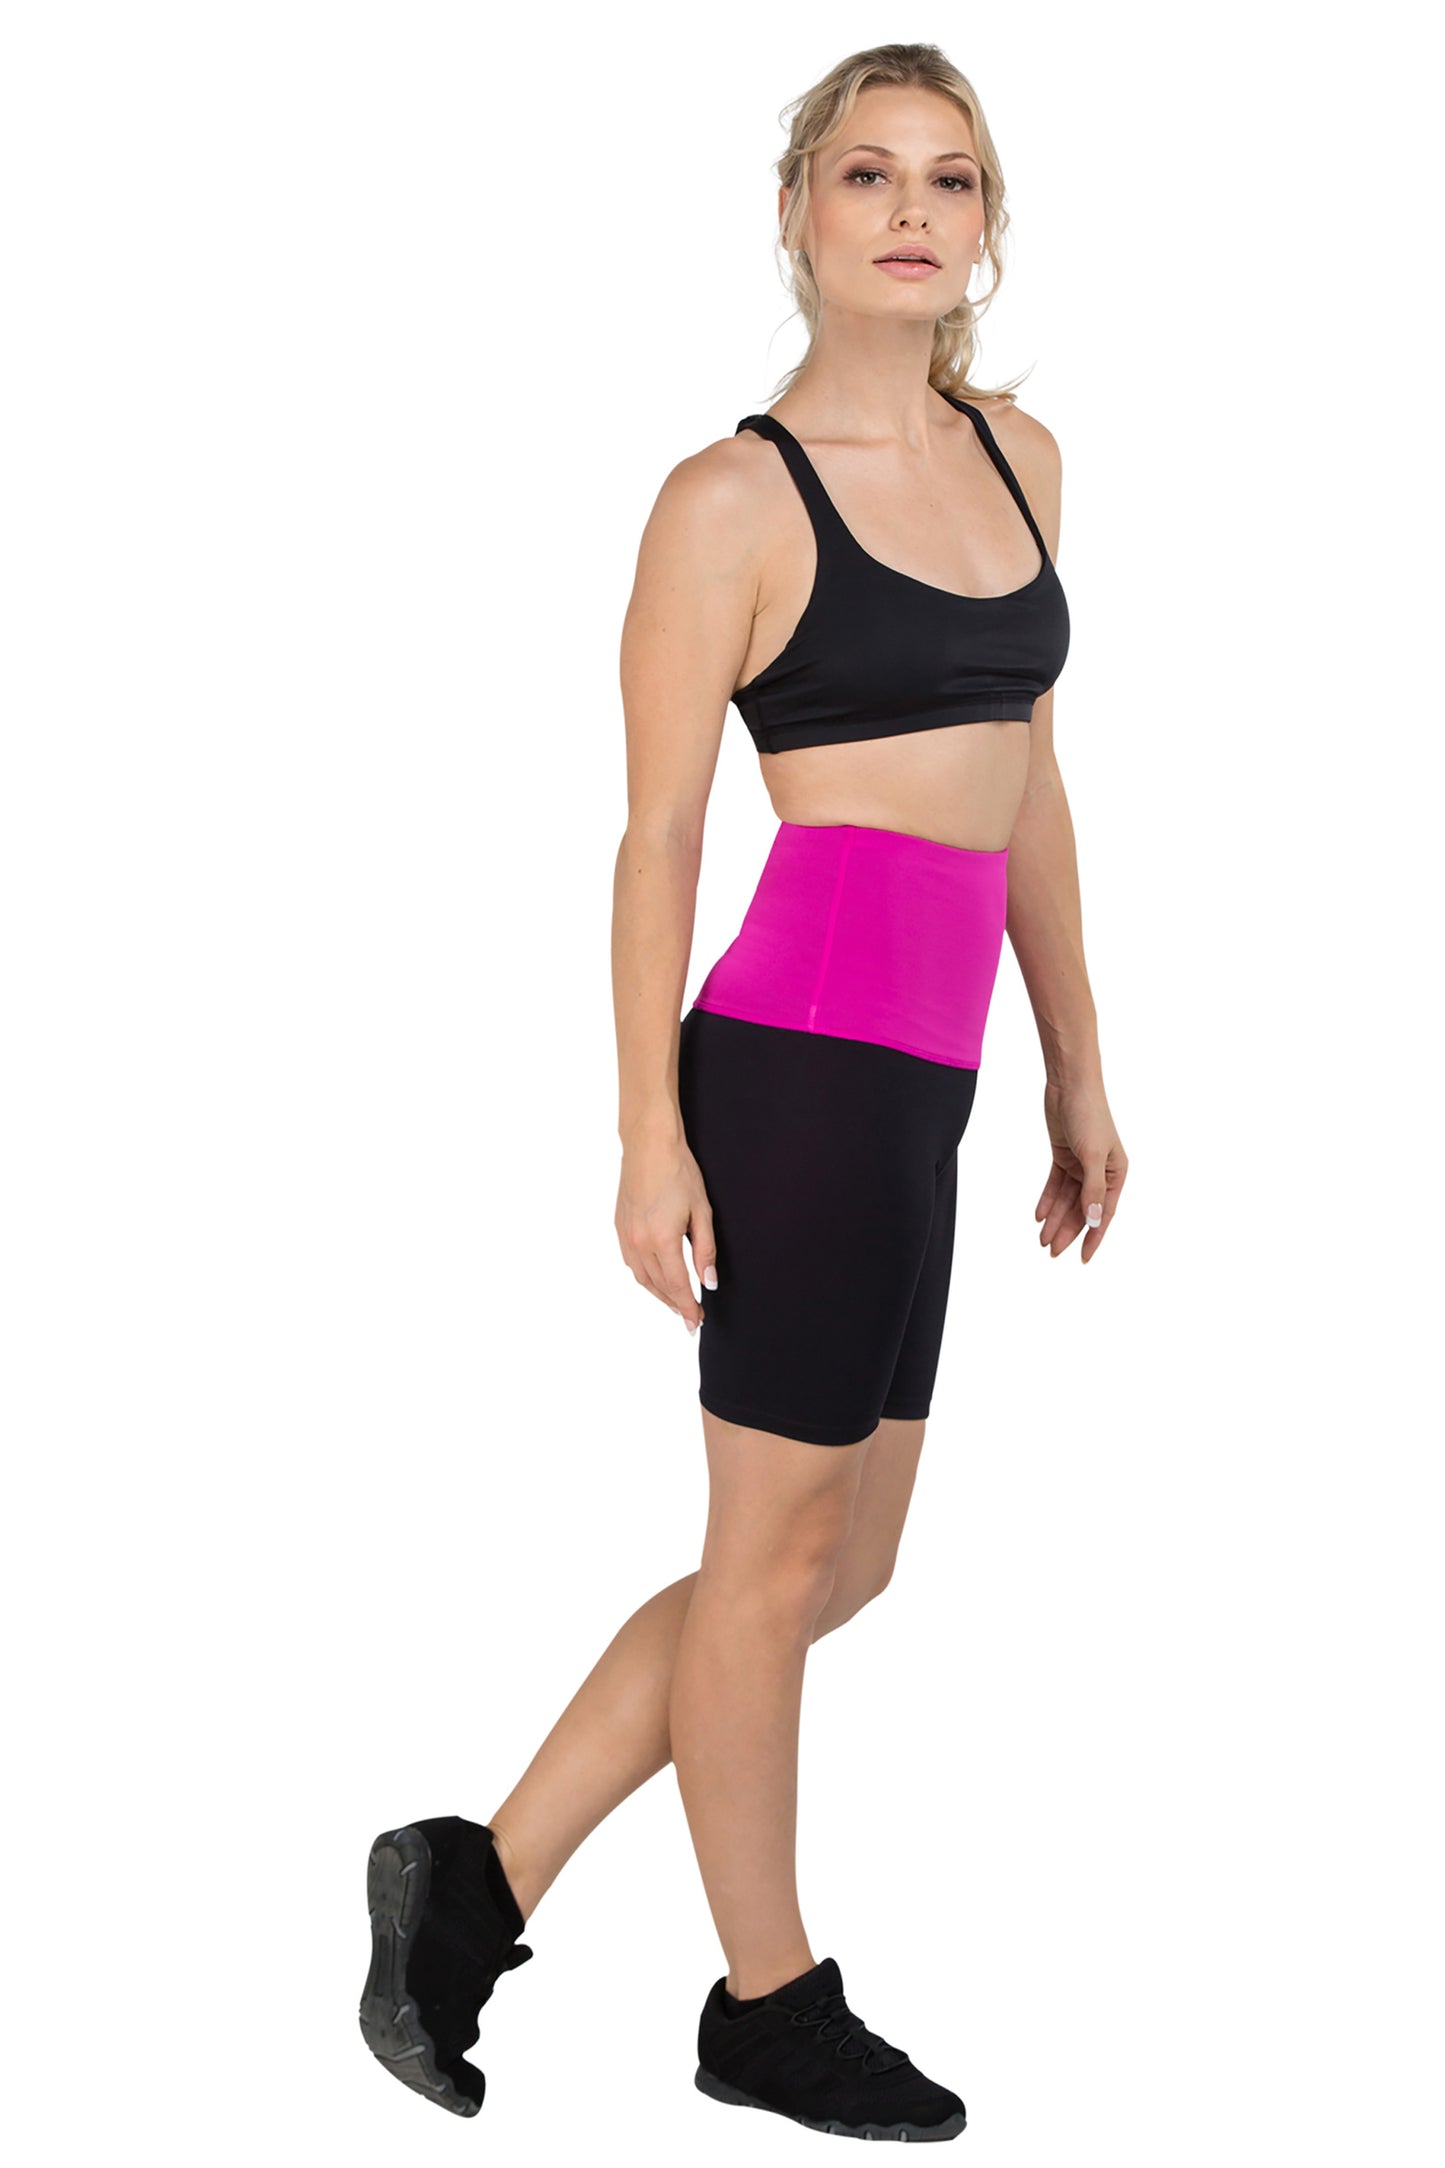 Mineral Infused High Waist Exercise Shorts - Black/Pink - Delfin Brands